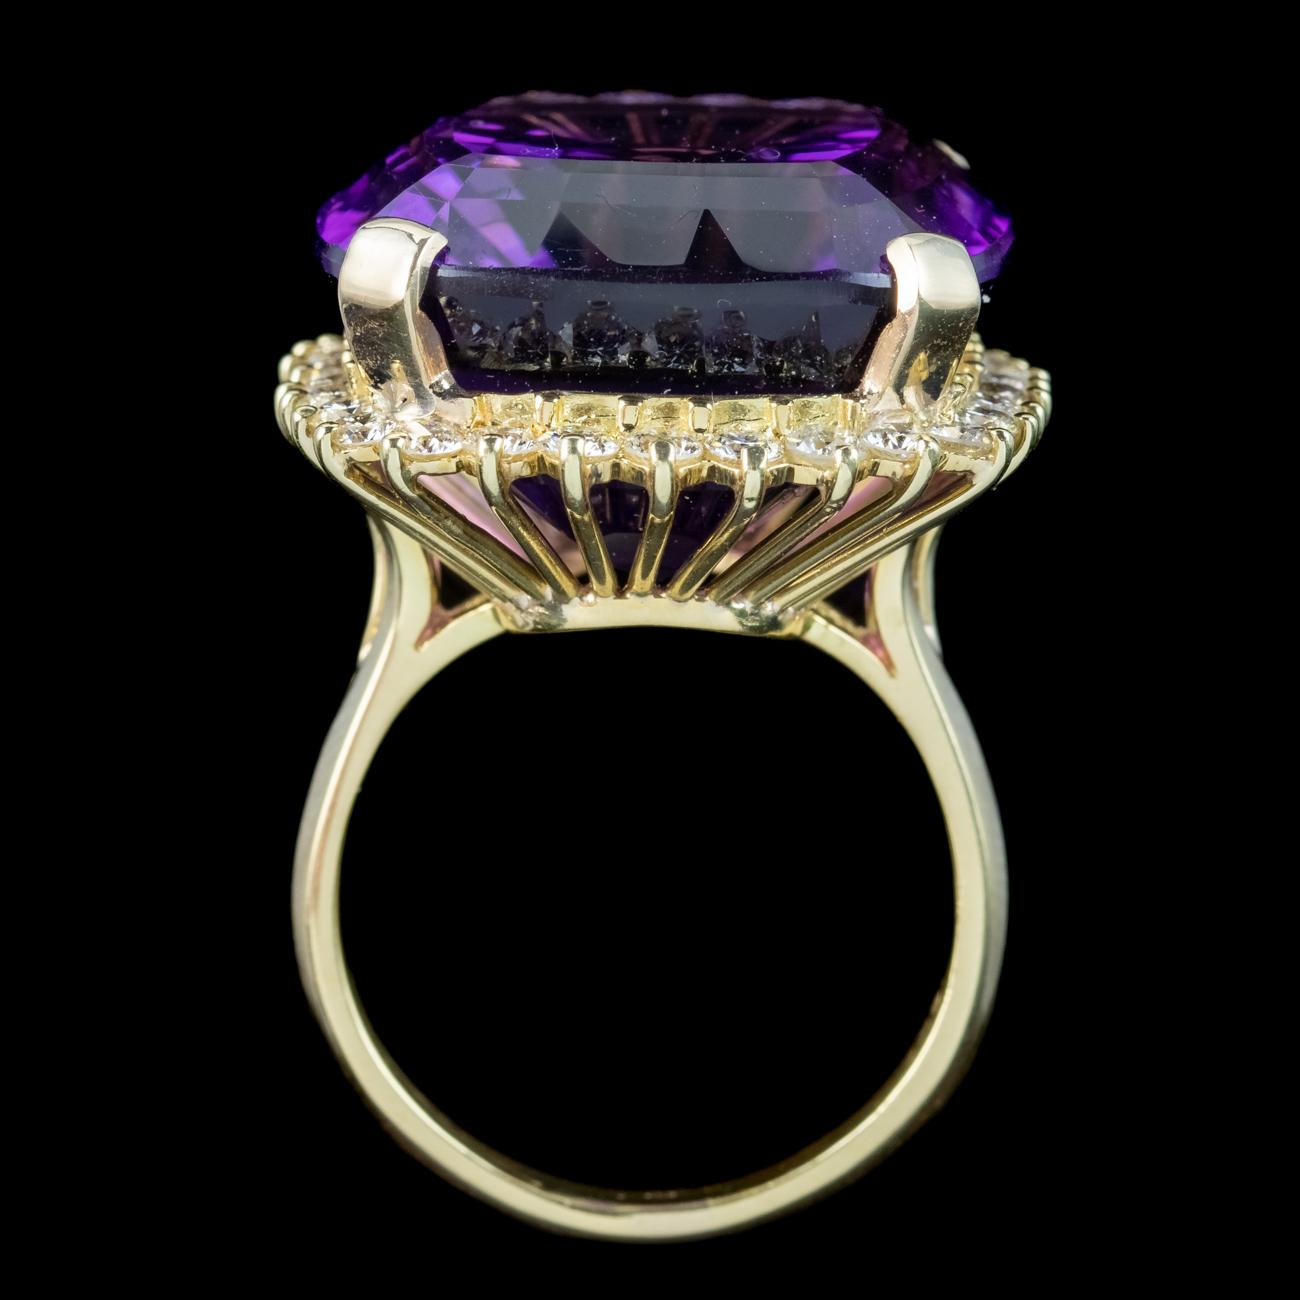 Vintage Amethyst Diamond Cocktail Ring 40ct Amethyst For Sale 1